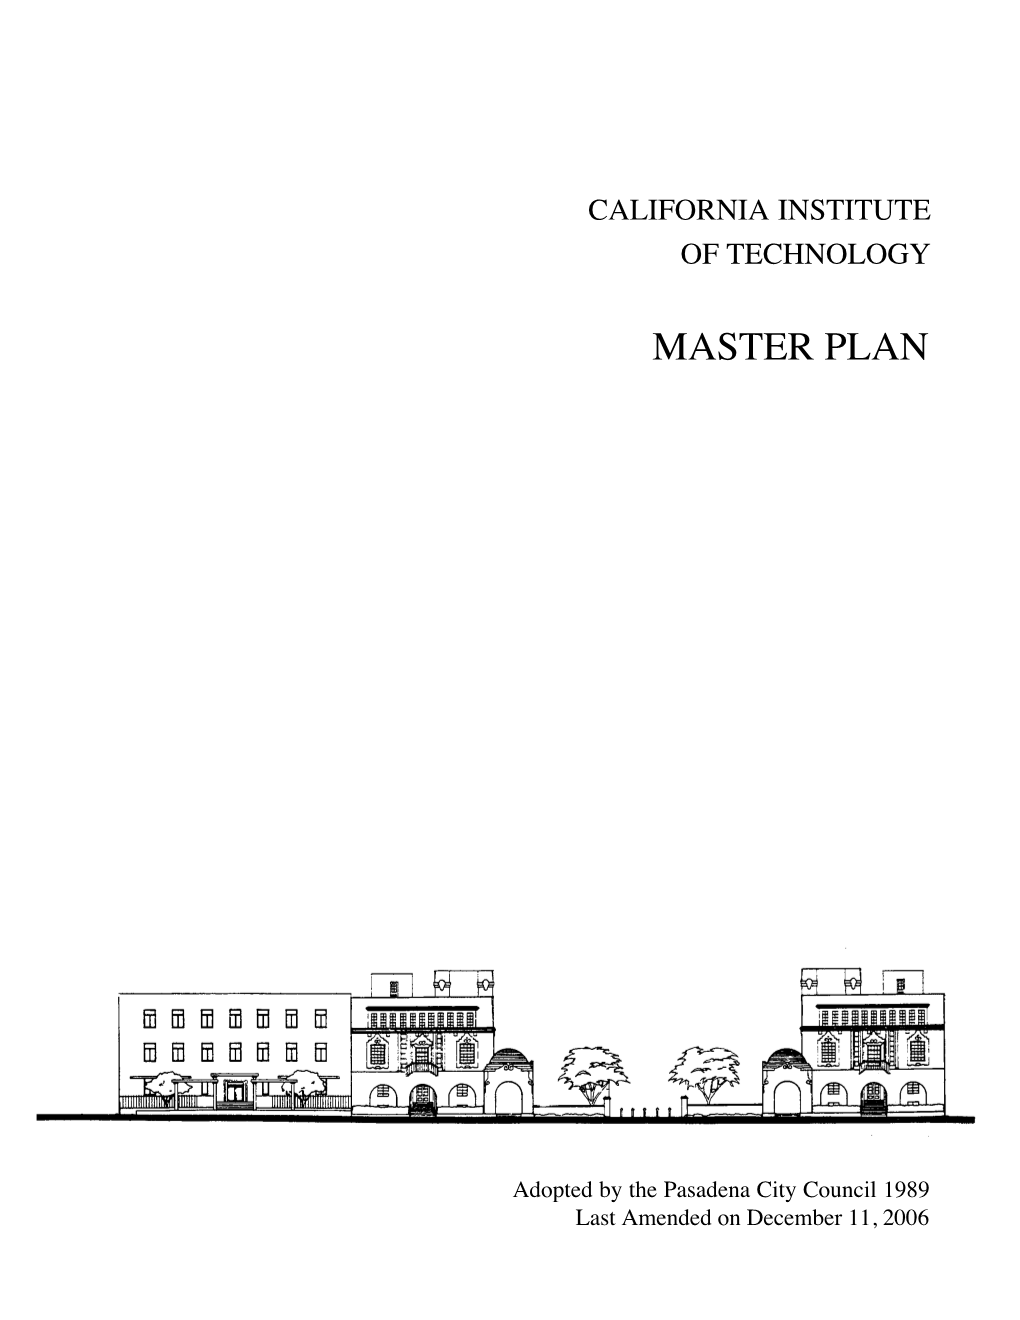 Caltech Master Plan for Future Academic Structures; Therefore, an Amendment to the 1989 Master Plan Was Necessary